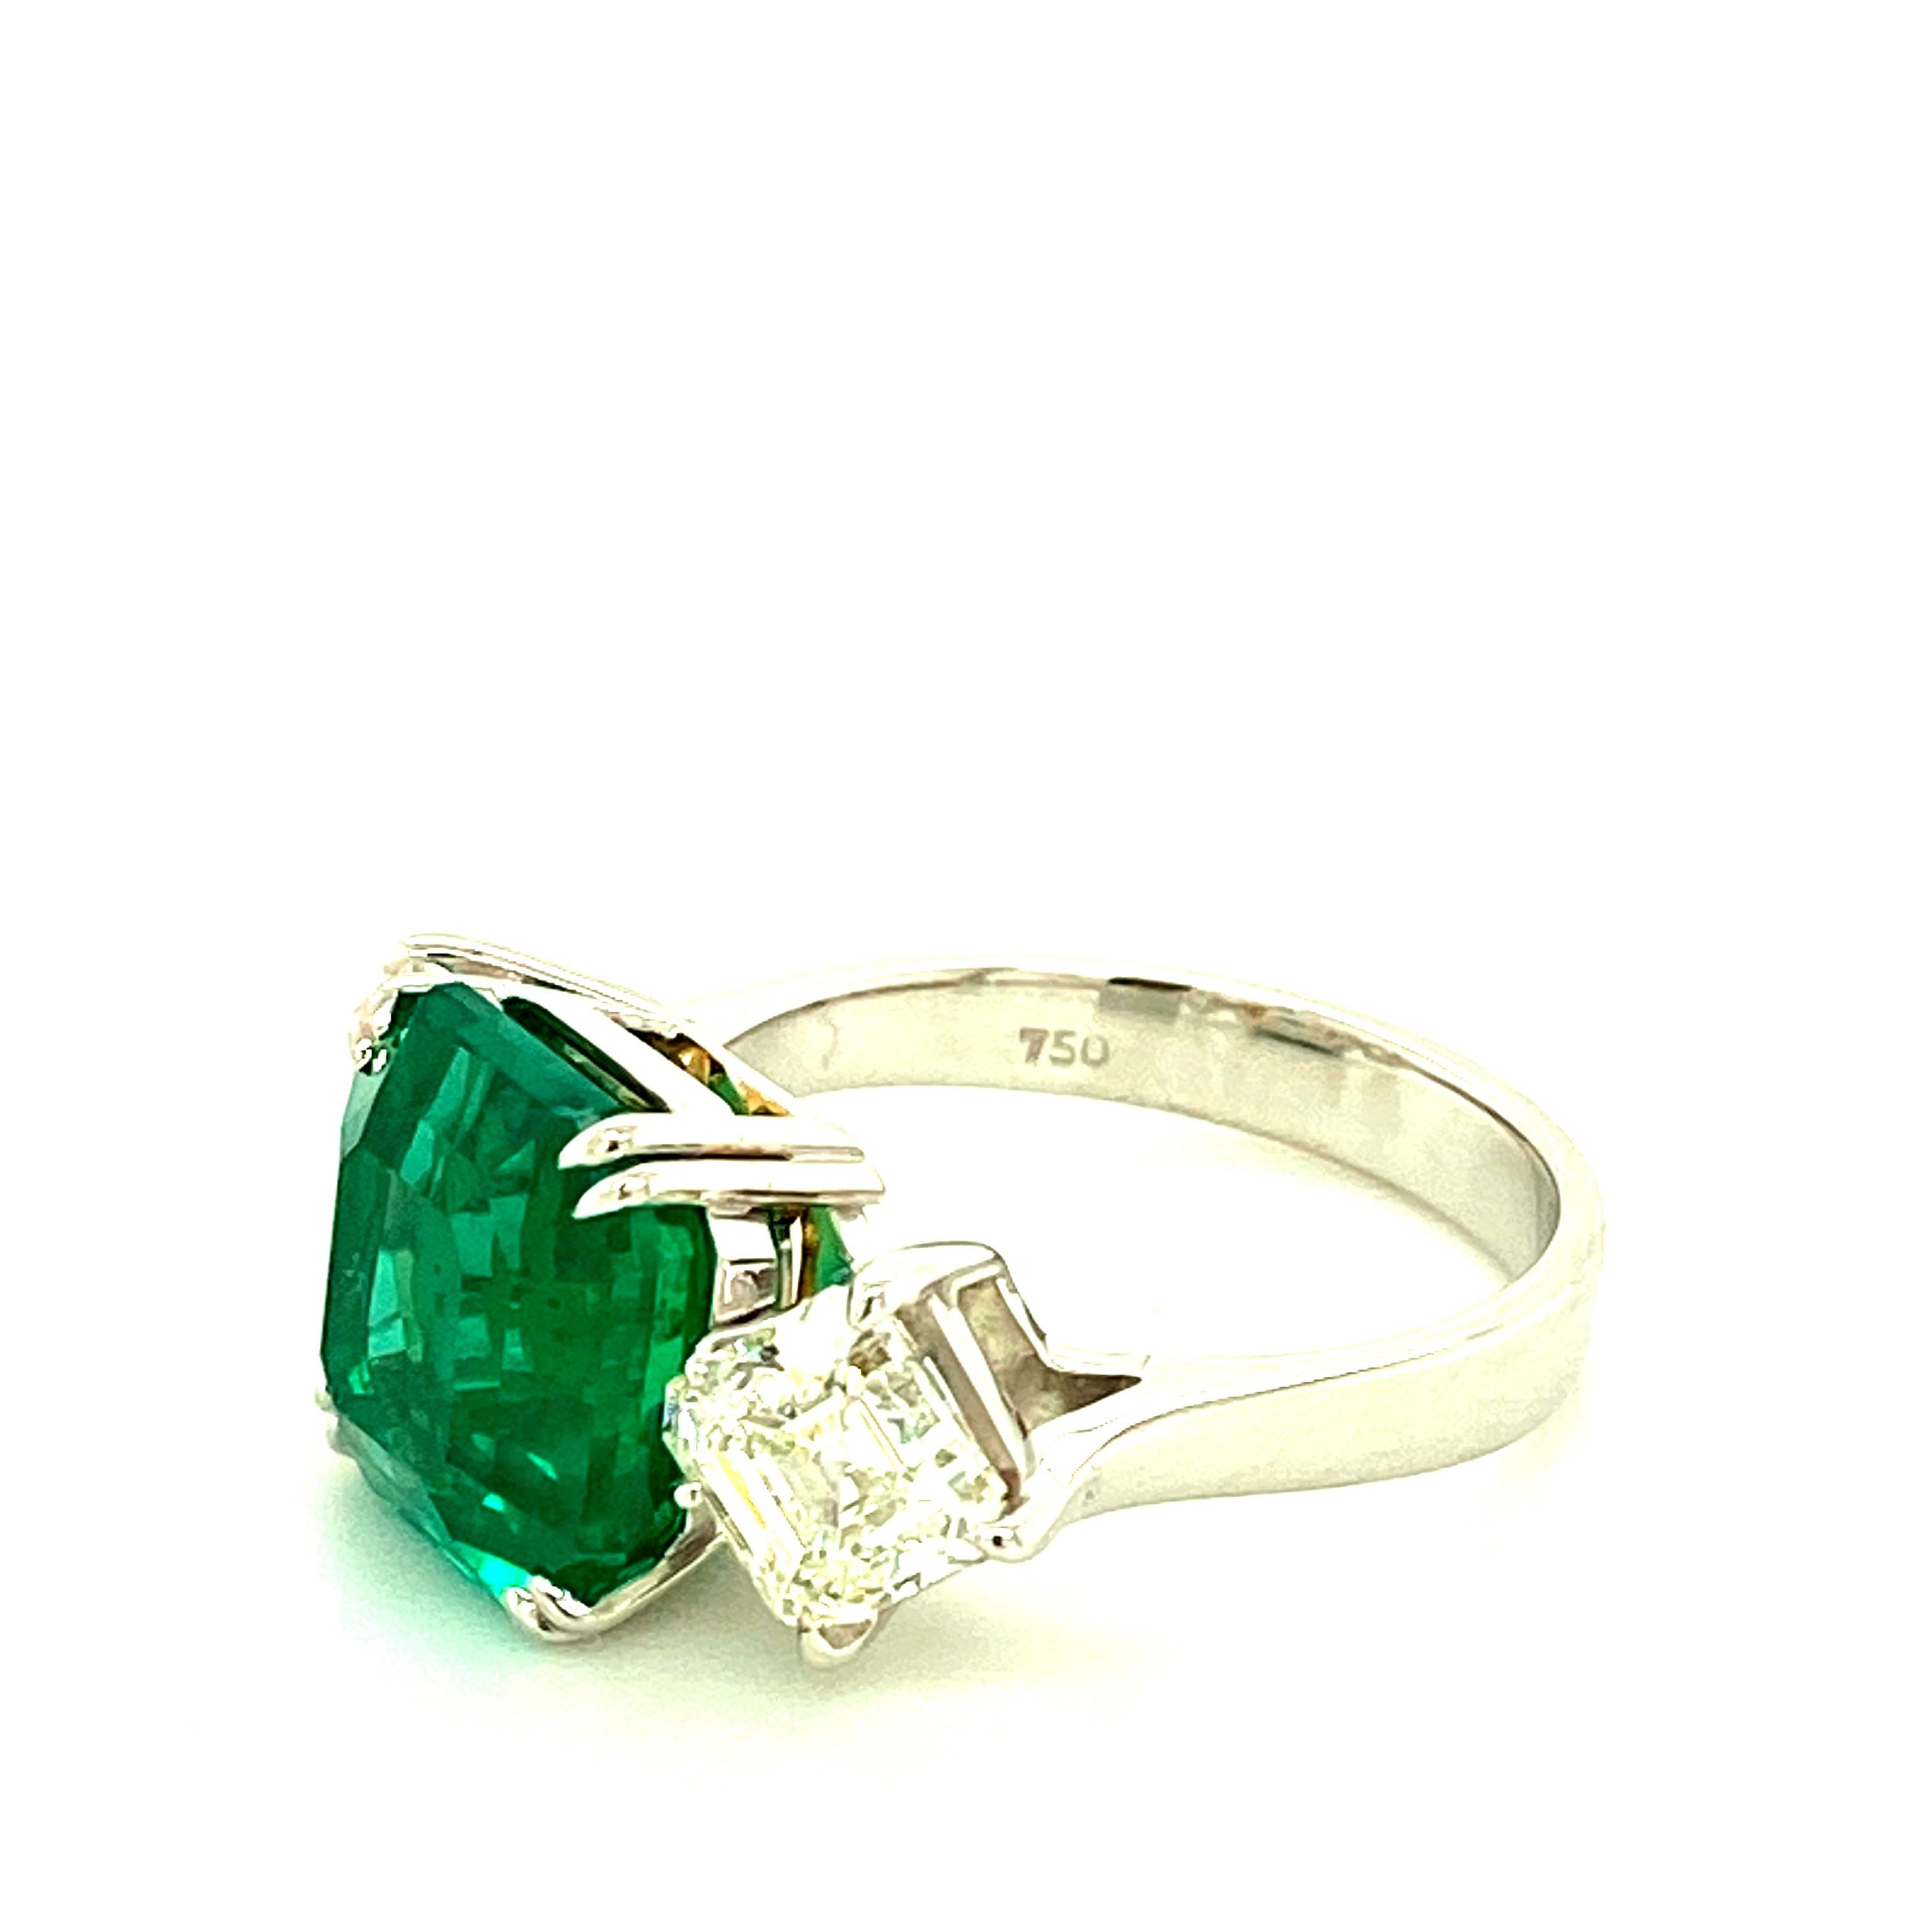 5.24 Carat GRS Certified Octagon Cut Emerald and Diamond Gold Engagement Ring:

A marvellous ring, it features a 5.24 carat GRS certified emerald accented by two asscher cut diamonds on the side weighing a total of 2 carat to form a three-stone